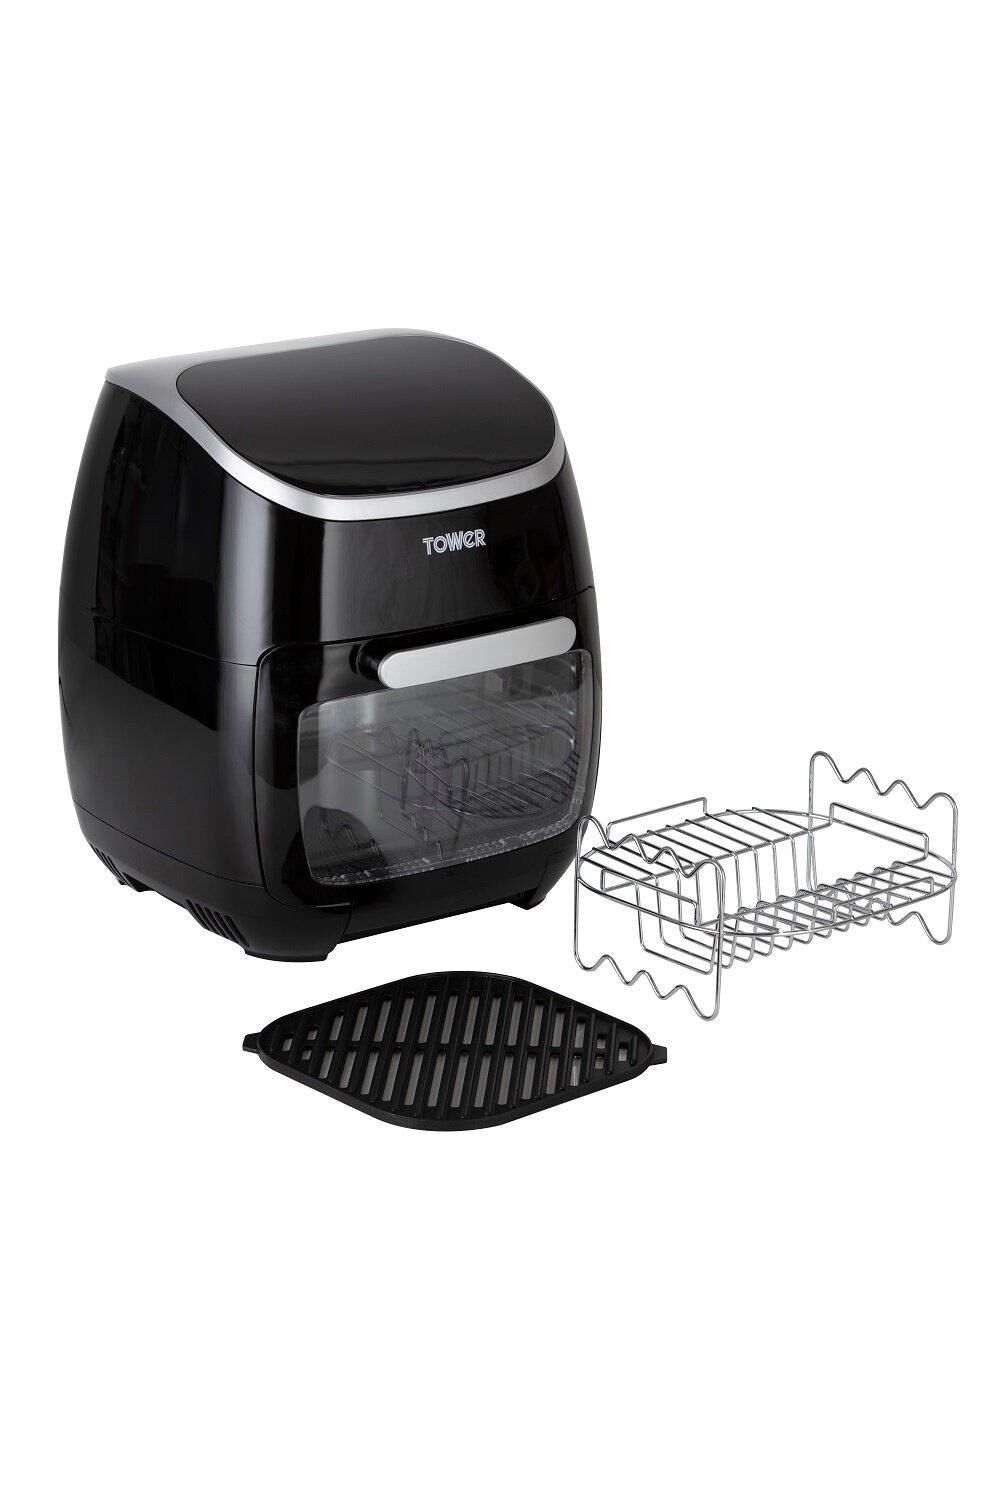 Tower 11L Air Fryer Oven